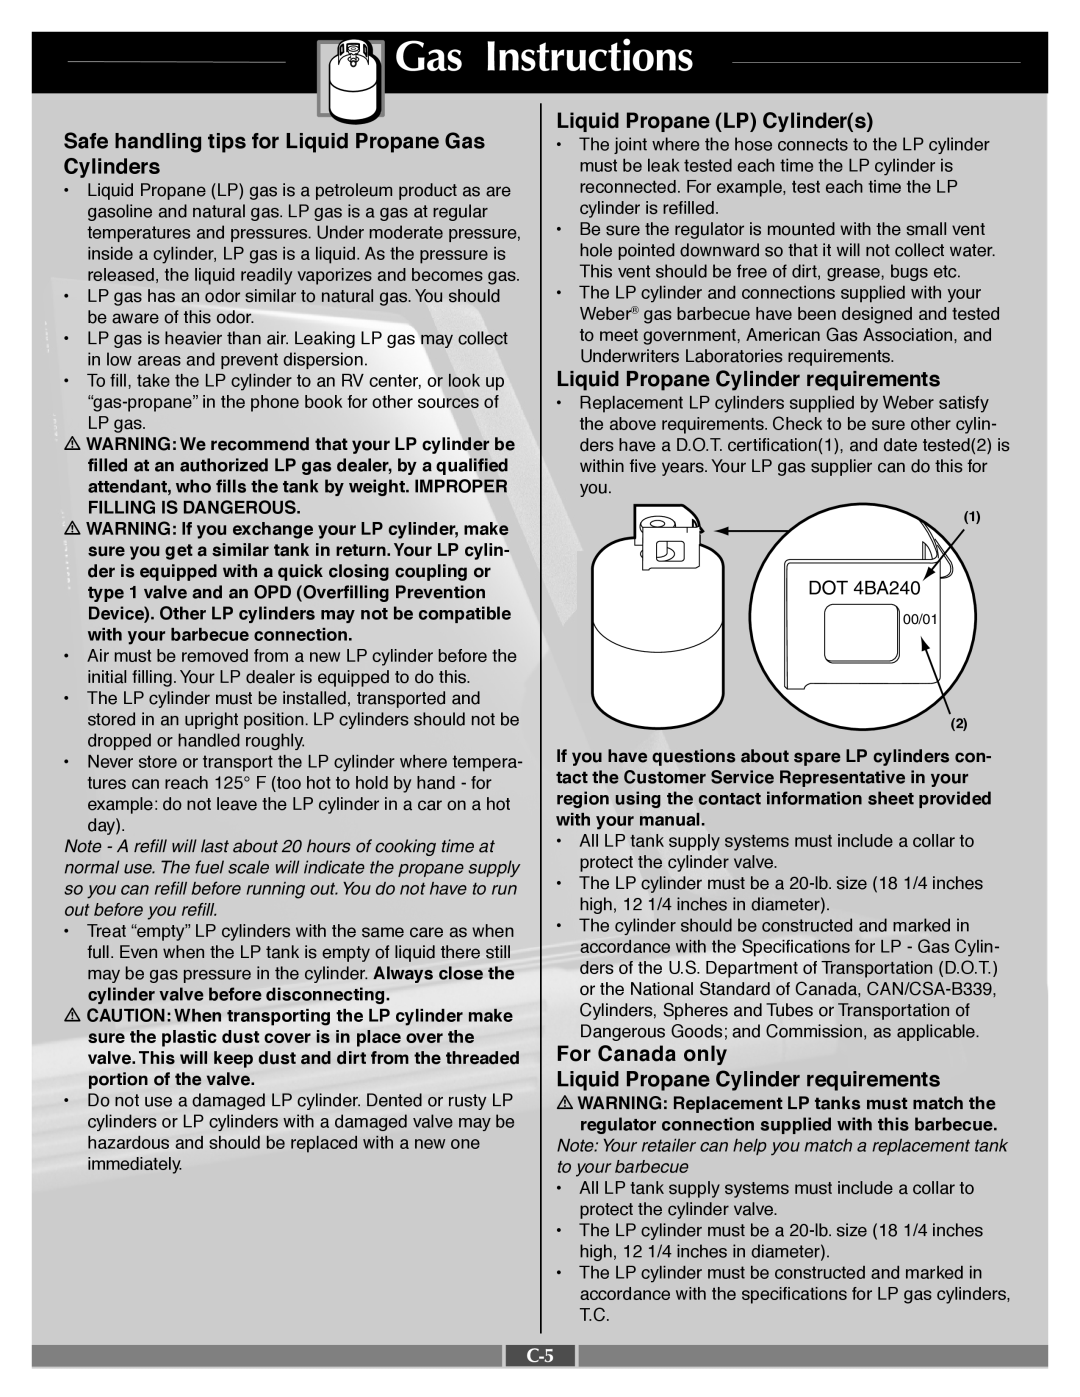 Weber 55545 manual Instructions, Safe handling tips for Liquid Propane Gas, Cylinders, Liquid Propane Cylinder requirements 